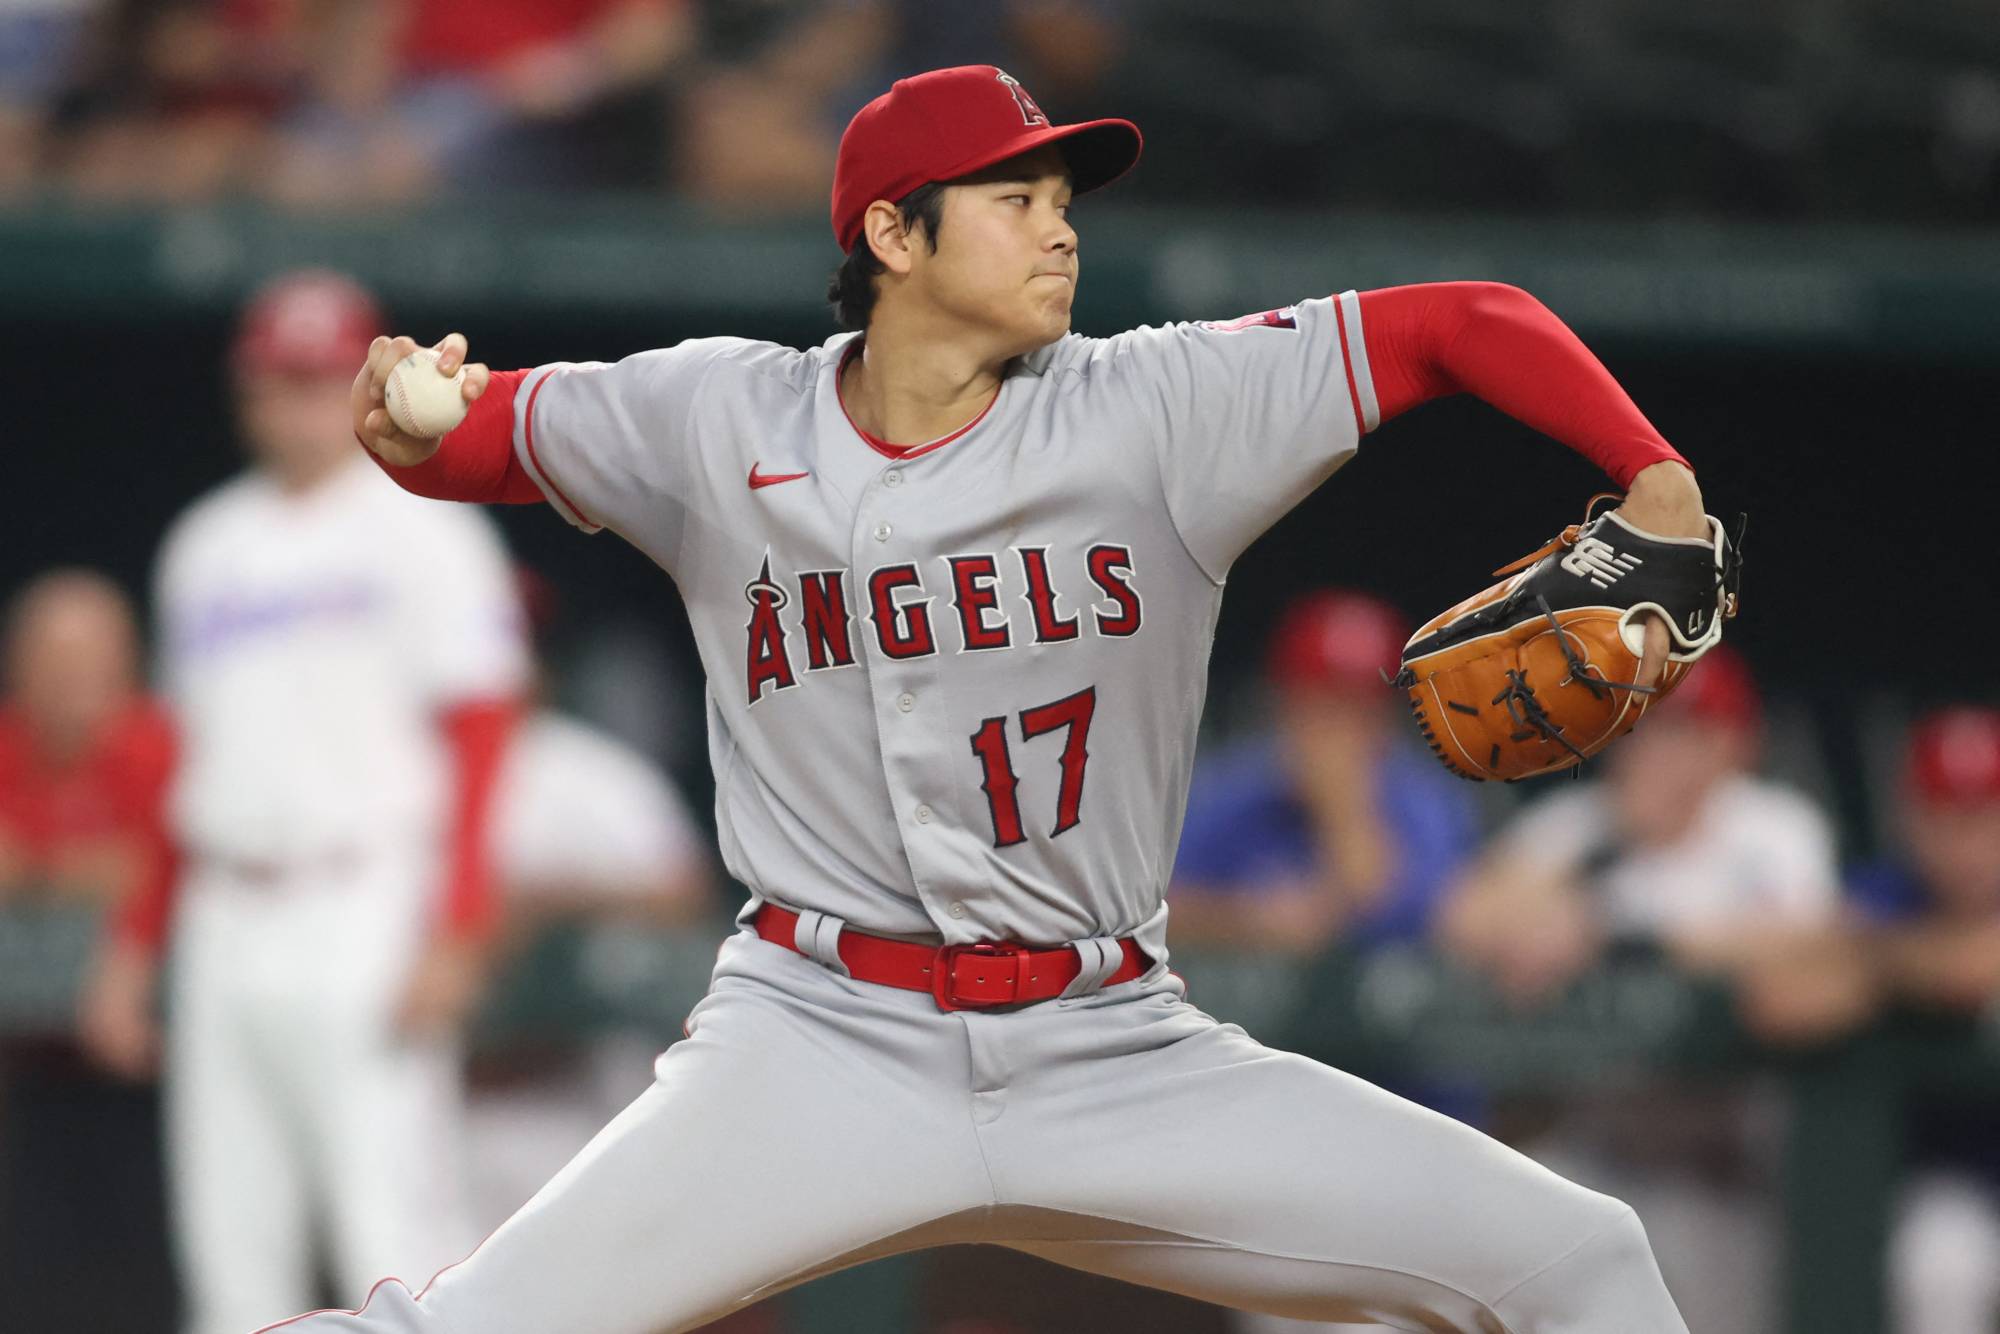 Angels' Shohei Ohtani named A.L. starting pitcher for All-Star Game